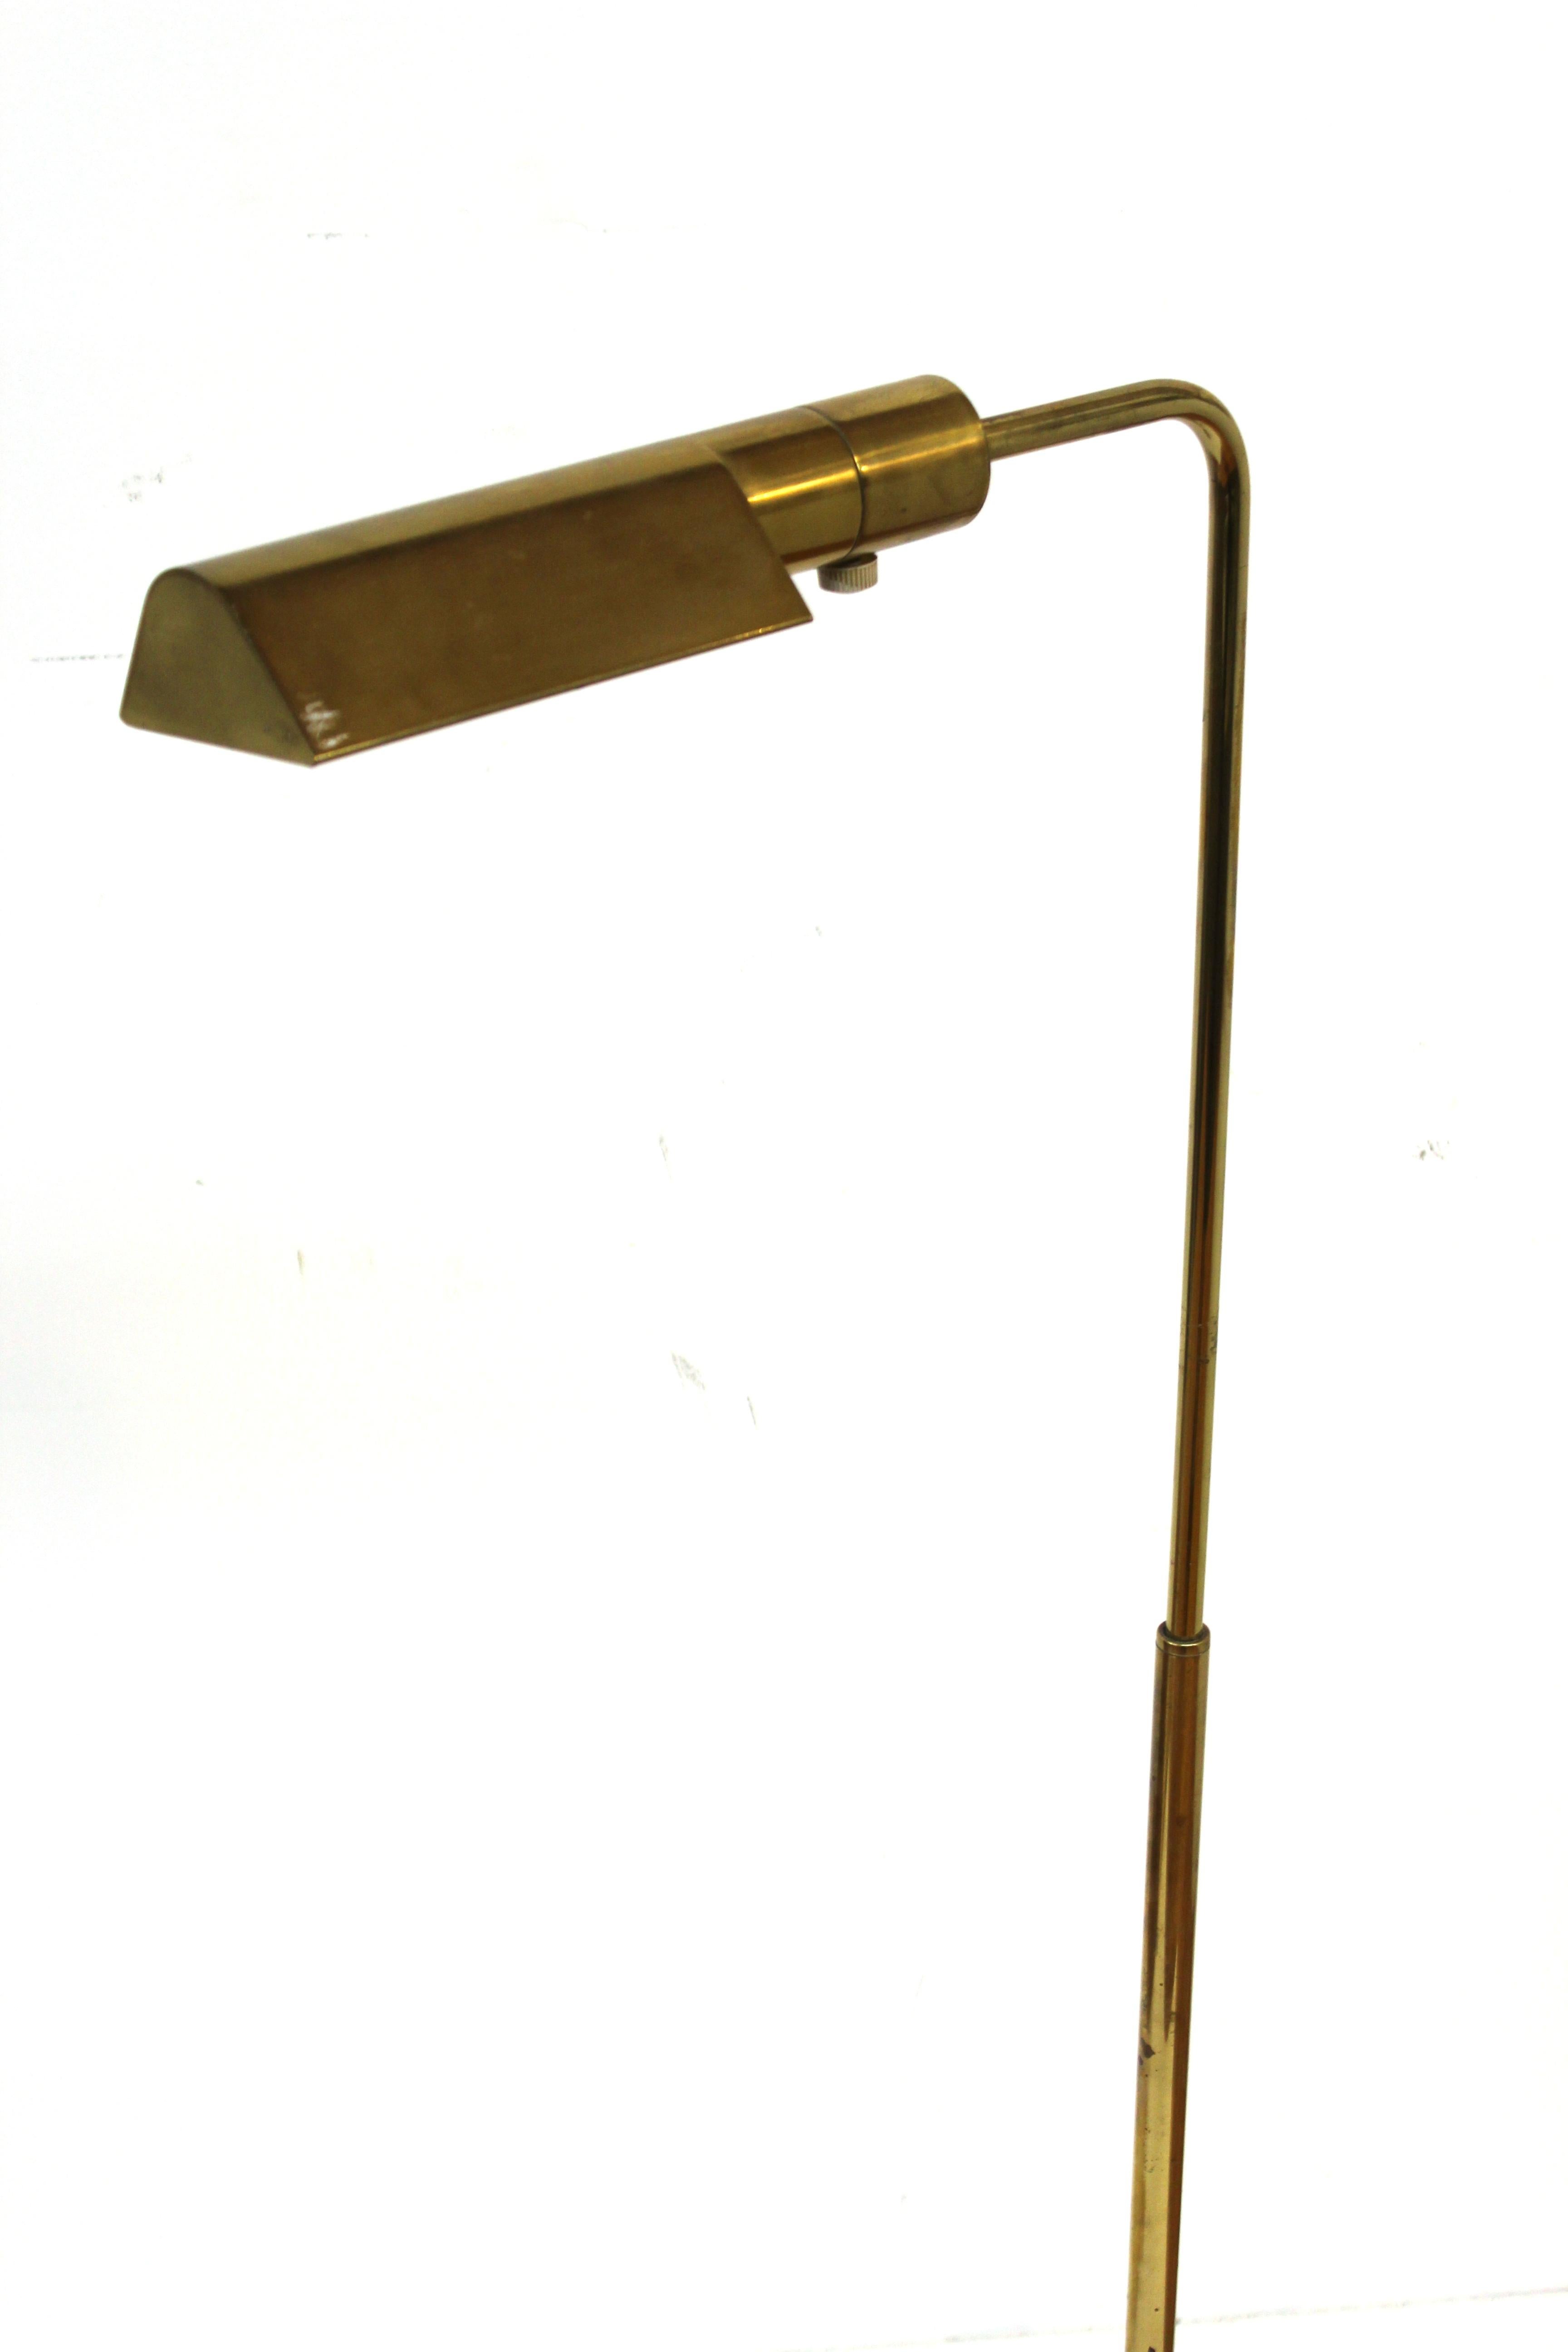 Mid-Century Modern heavy brass pharmacy floor lamp made by Casella. The piece has an adjustable neck and a moving shade. Makers label on the bottom. In great vintage condition with age-appropriate wear and use.